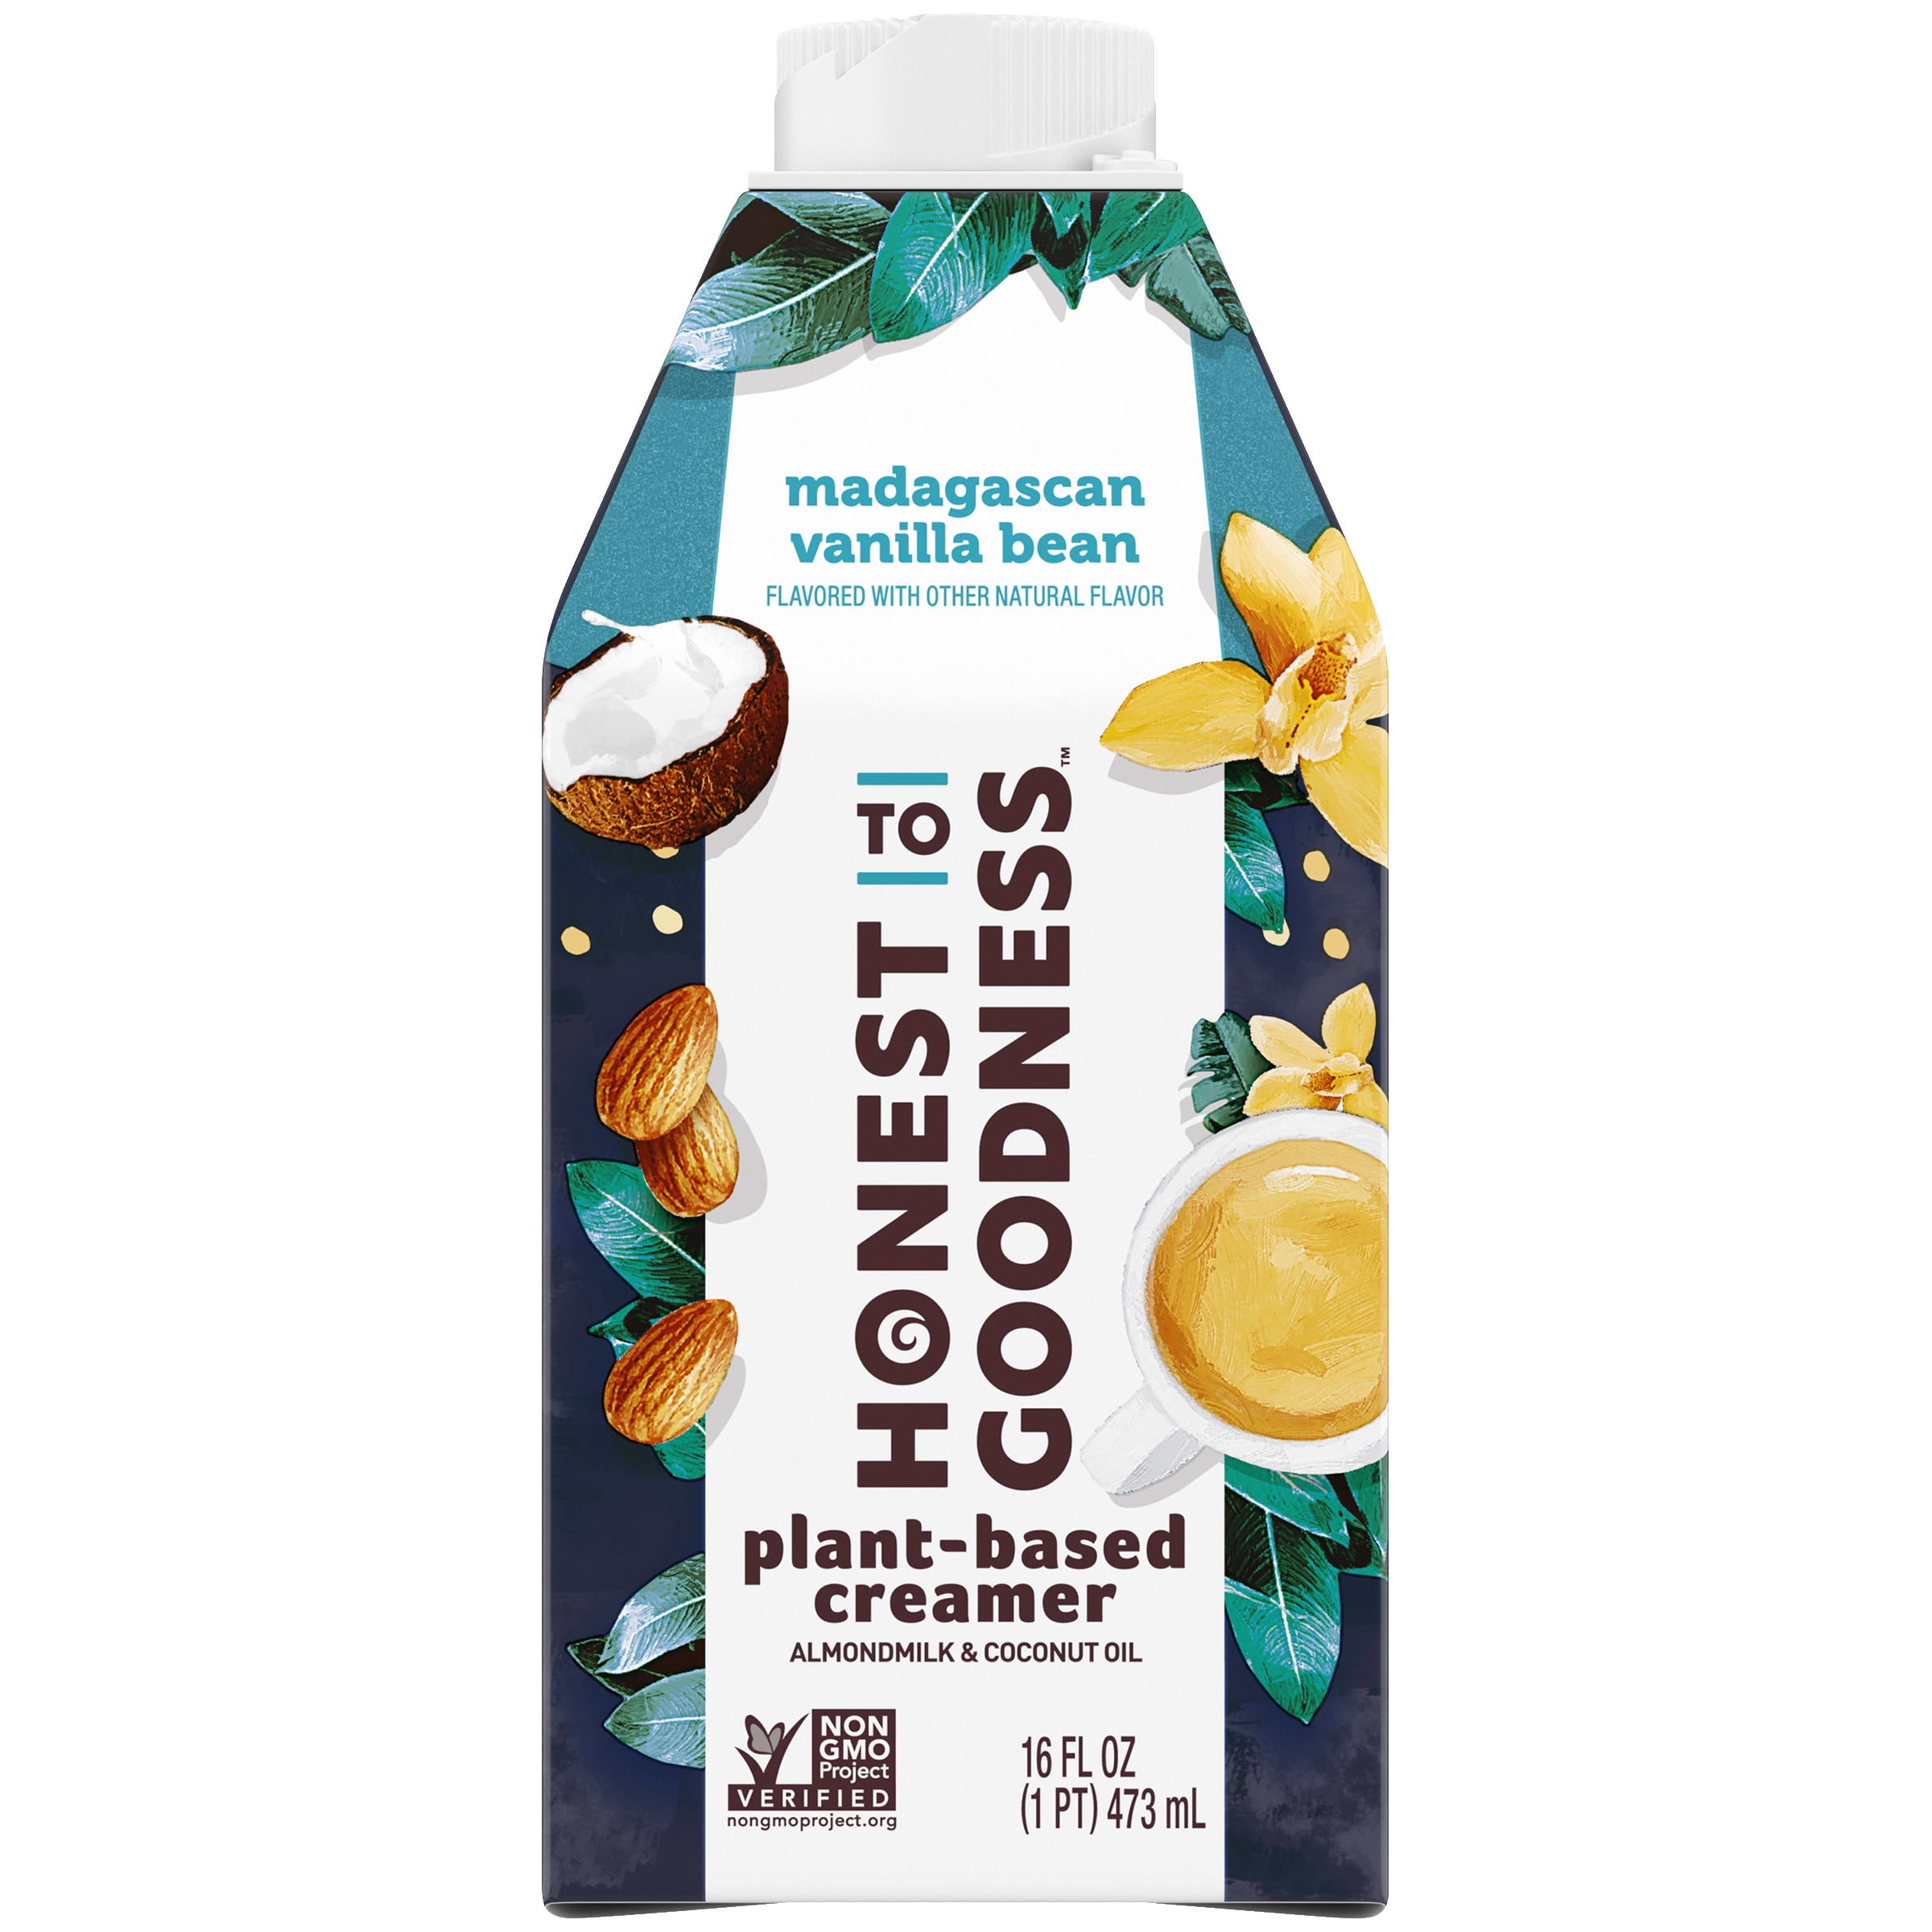 Honest To Goodness, Dairy Free, Madagascan Vanilla Bean Coffee Creamer, Made with Almond milk and Coconut Oil, 16oz.